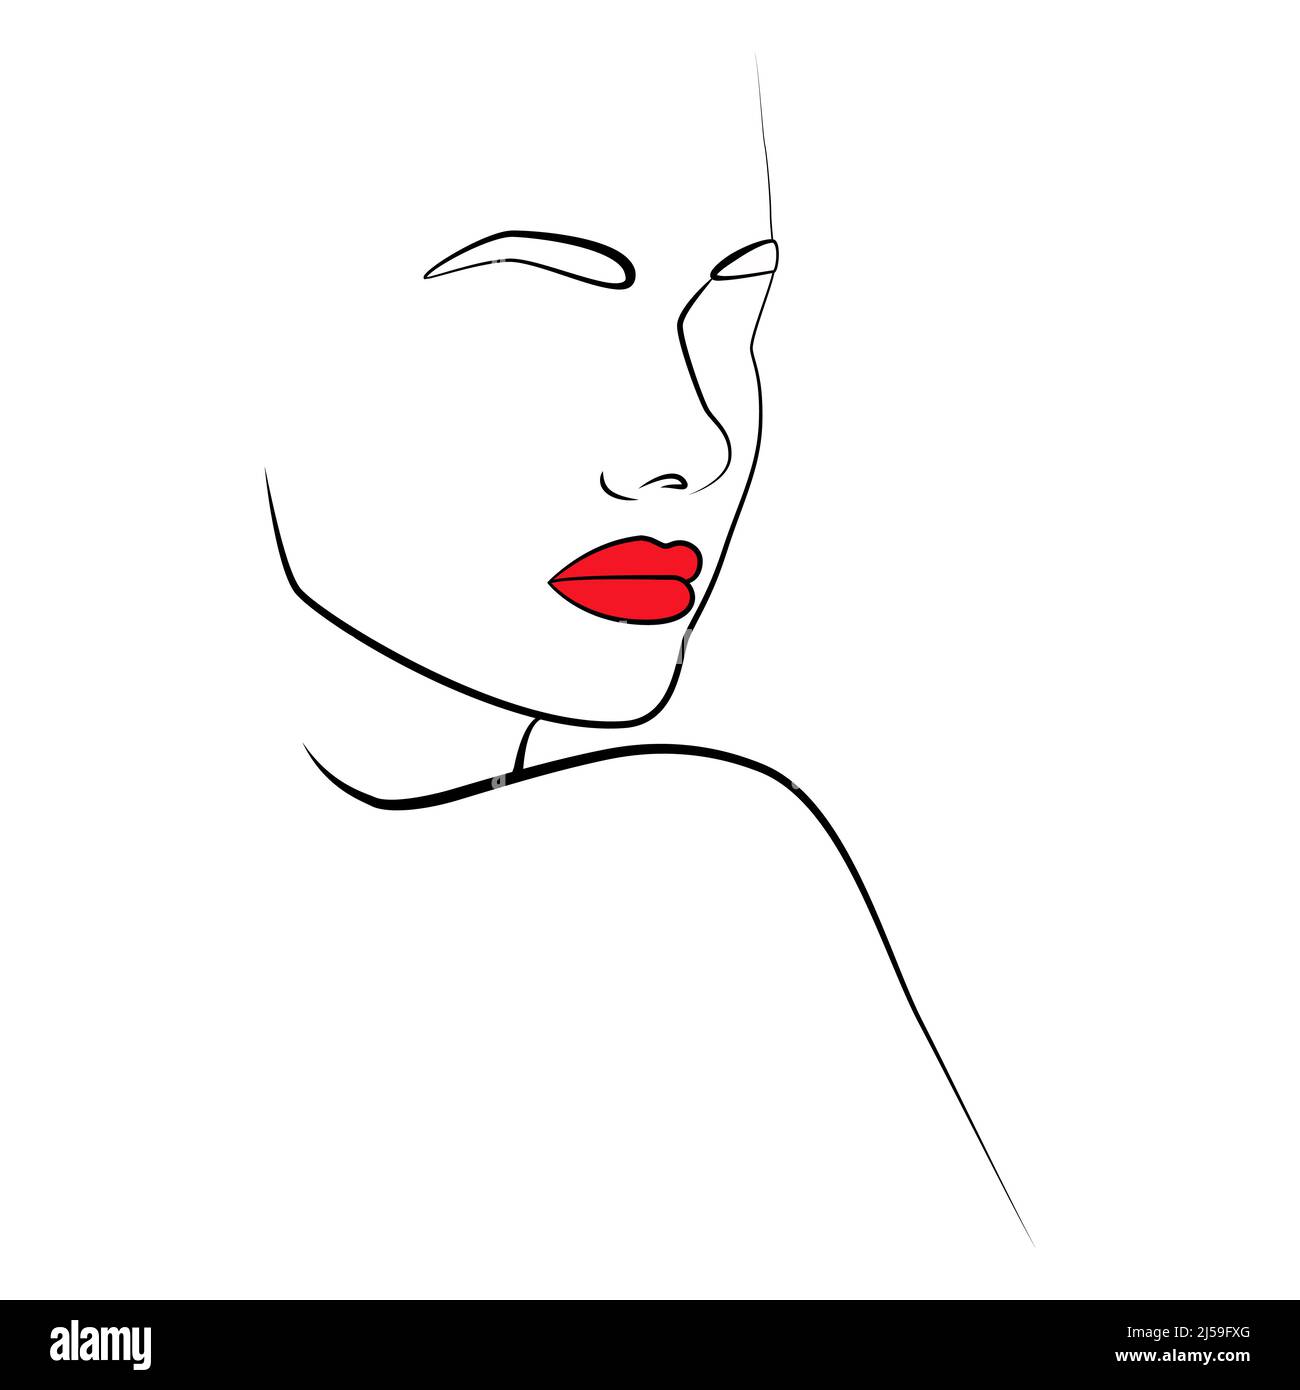 Beauty black silhouette, a woman's face with red lips. Linear art, female face. Beauty salon icon. The concept of beauty. Stock Vector